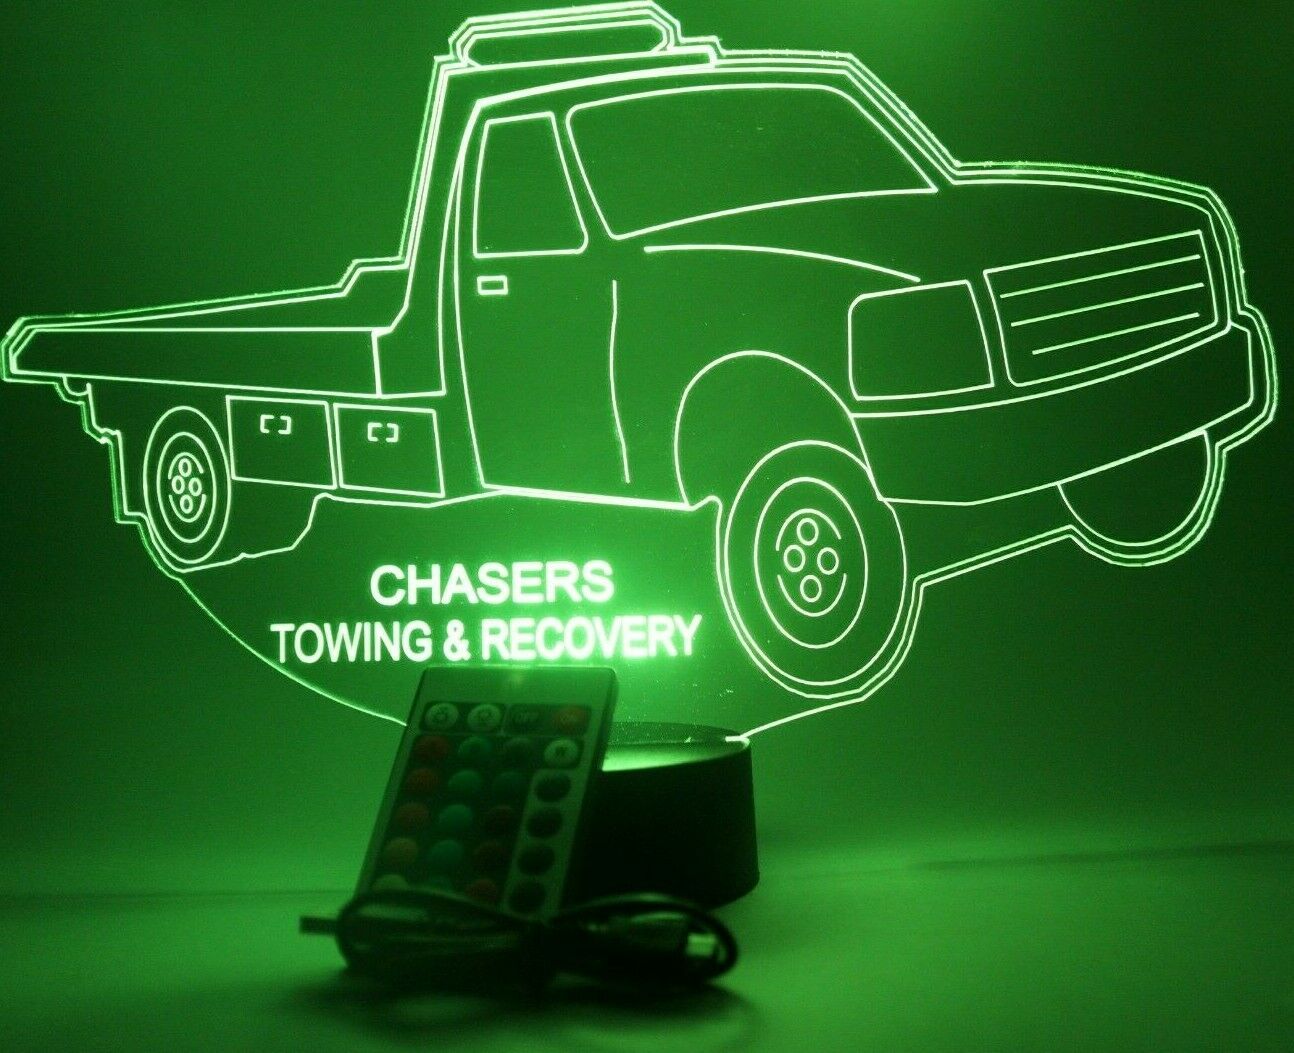 Flatbed Tow Truck LED Tabletop Night Light Up Lamp, 16 Color options with Remote